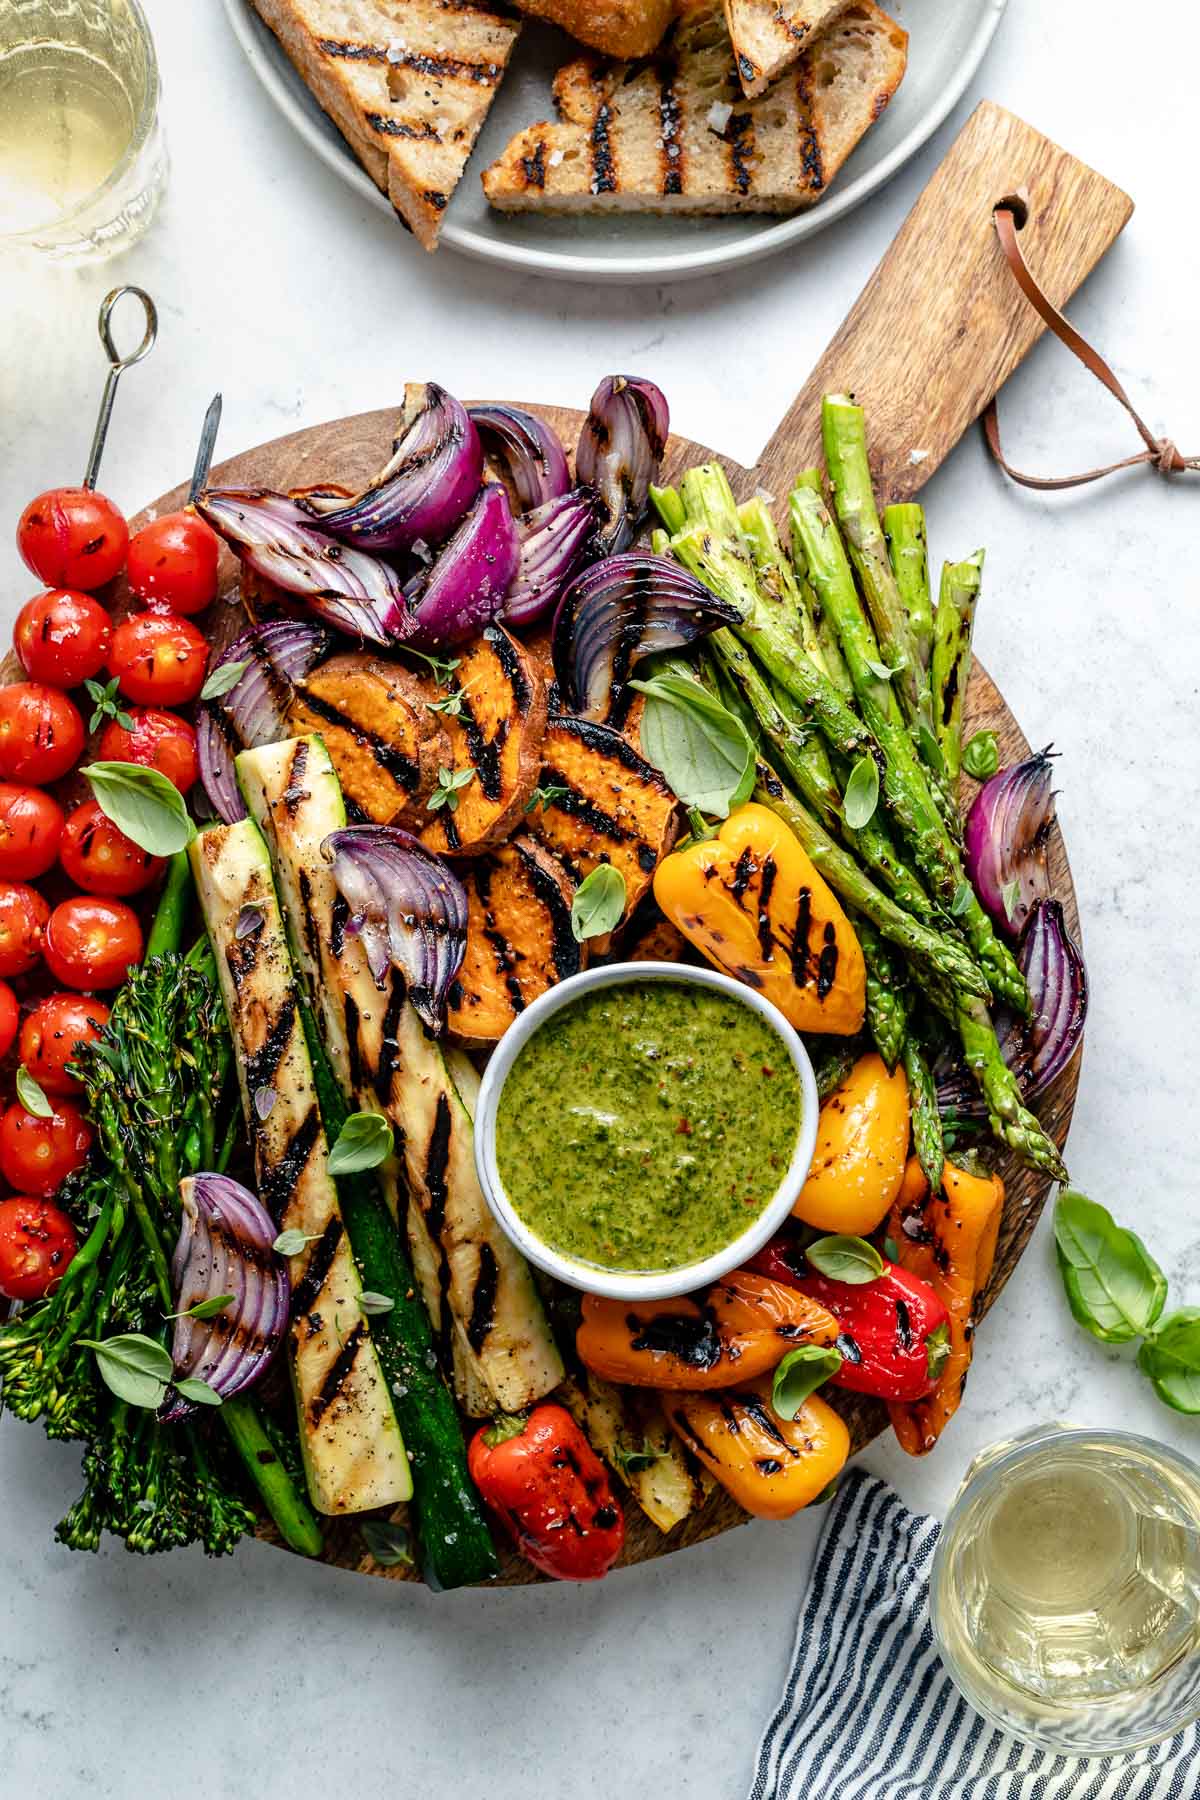 Grilled veggies including grilled cherry tomato skewers, grilled broccolini, grilled zucchini spears, grilled onion, grilled bell peppers, & grilled asparagus are arranged on a round wooden cutting board for serving. The grilled veggies are garnished with fresh herbs & surround a small white bowl of chimichurri sauce for dipping that also rests on the cutting board. A white ceramic plate filled with grilled bread, two small glasses of wine, fresh basil & a blue & white linen napkin surround the cutting board. All serving ware sits on top of a blue & white marbled surface.